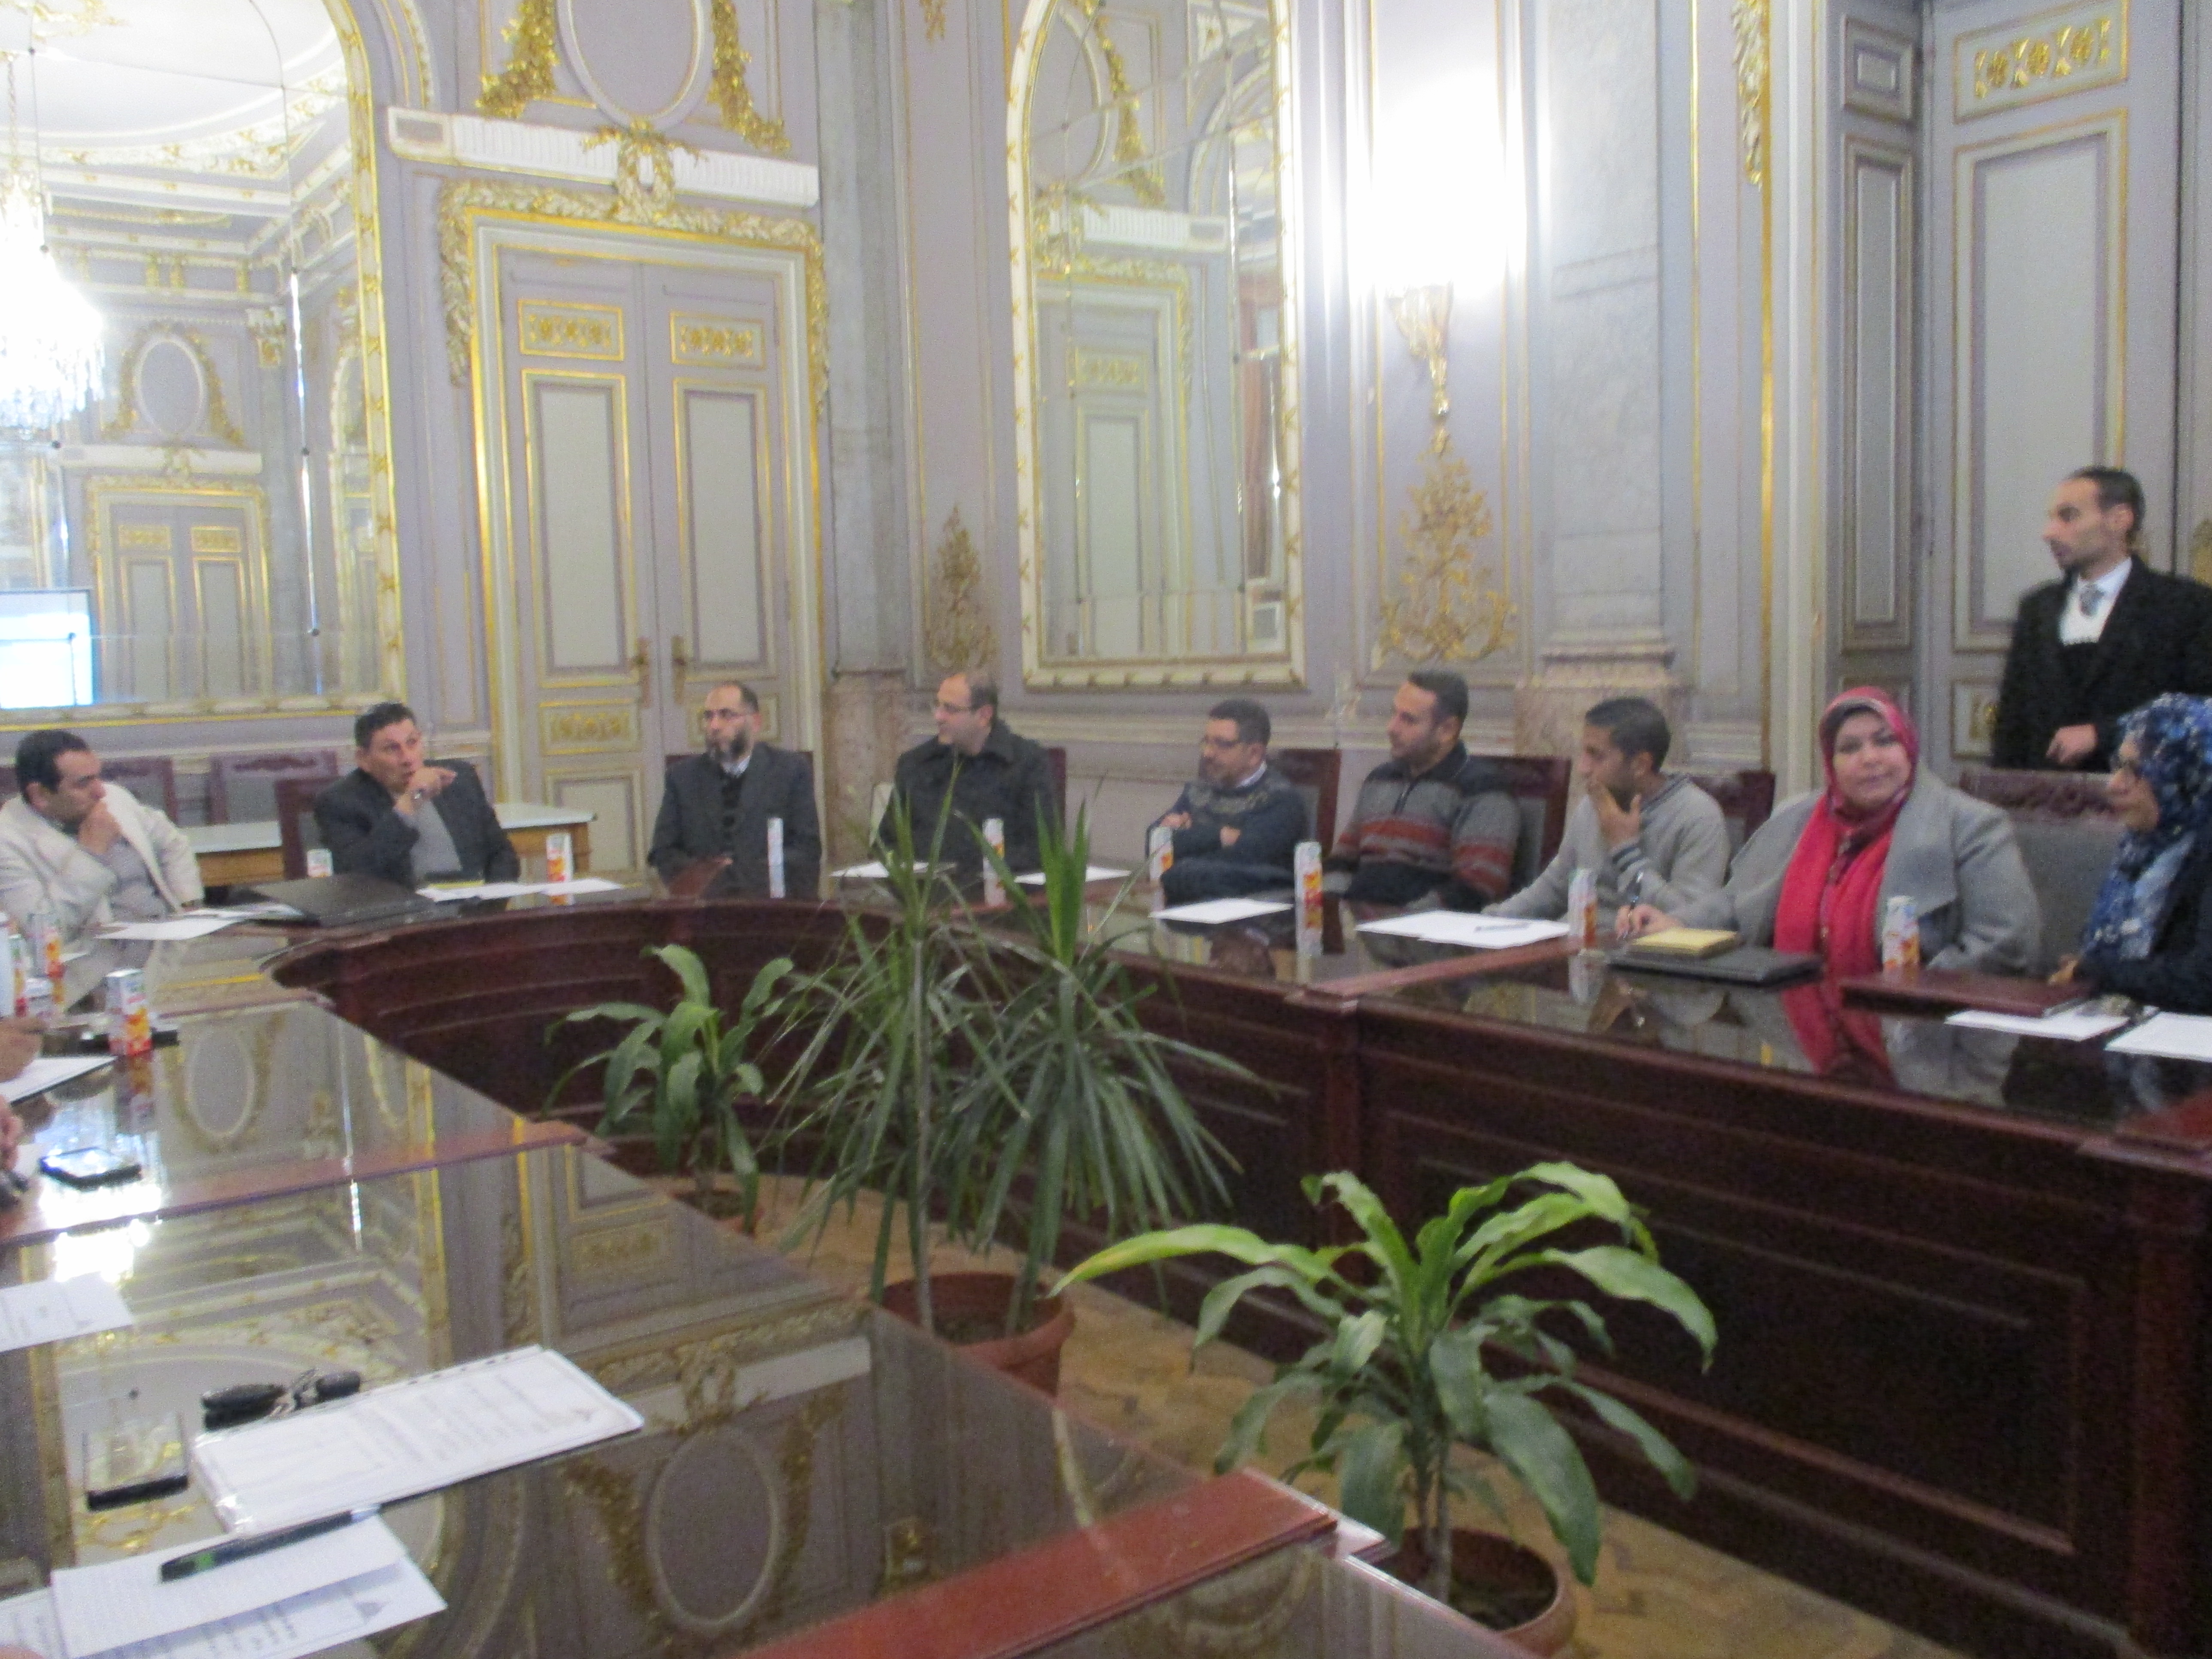 The Vice President for Graduate Studies and Research held a meeting with IT project managers